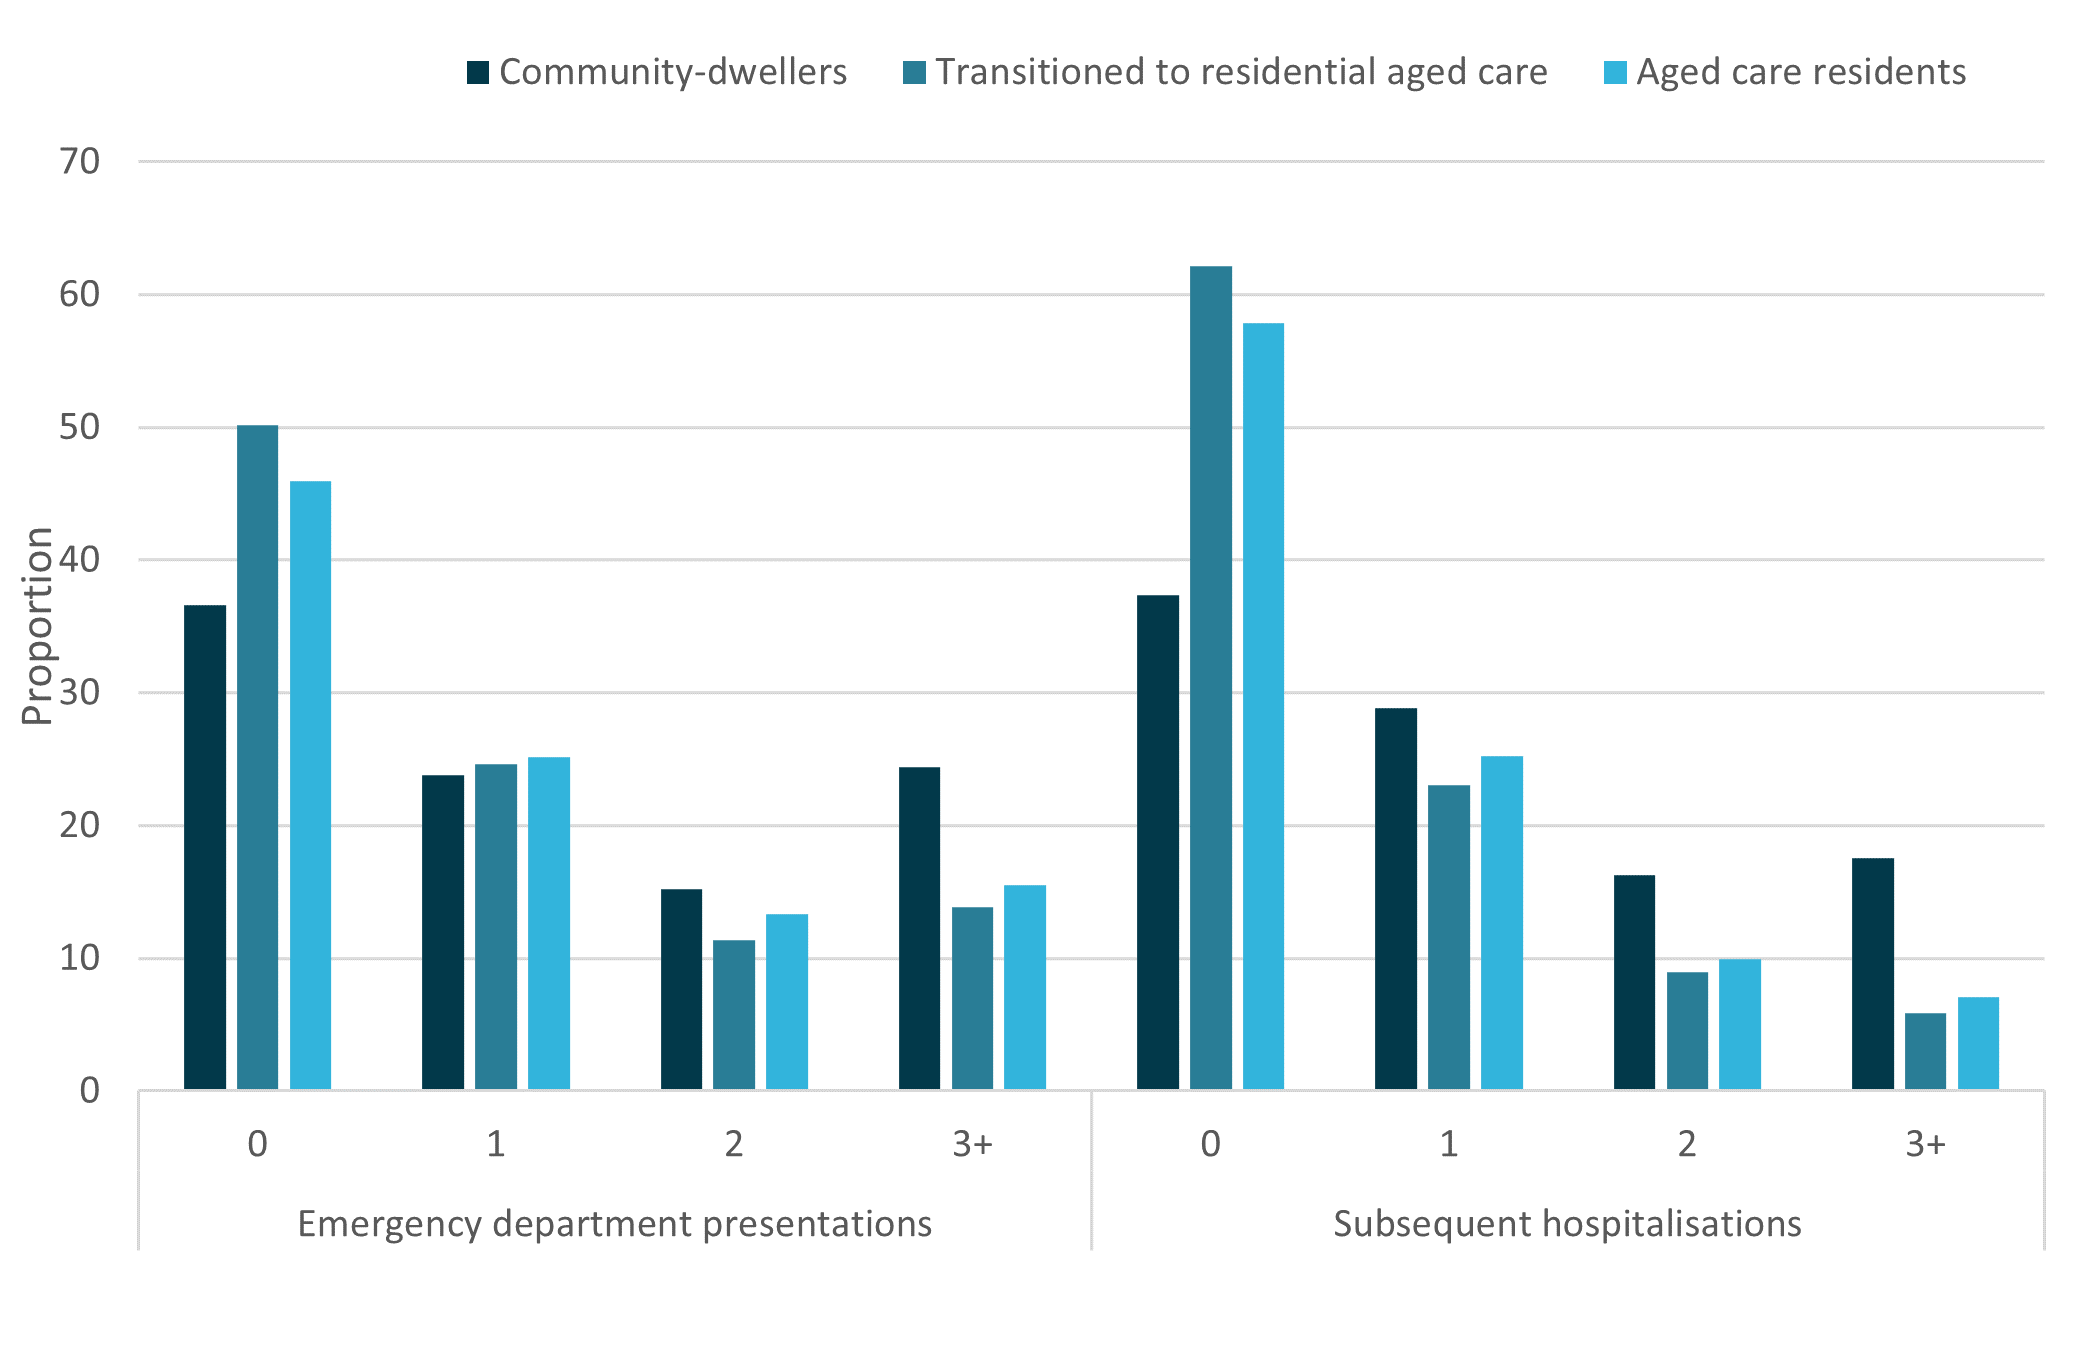 The figure is a bar chart and shows that people who continued to live in the community after their first hospitalisation were more likely to have emergency department presentations and subsequent hospitalisations than people who continued to live in aged care or moved from the community to live in aged care.